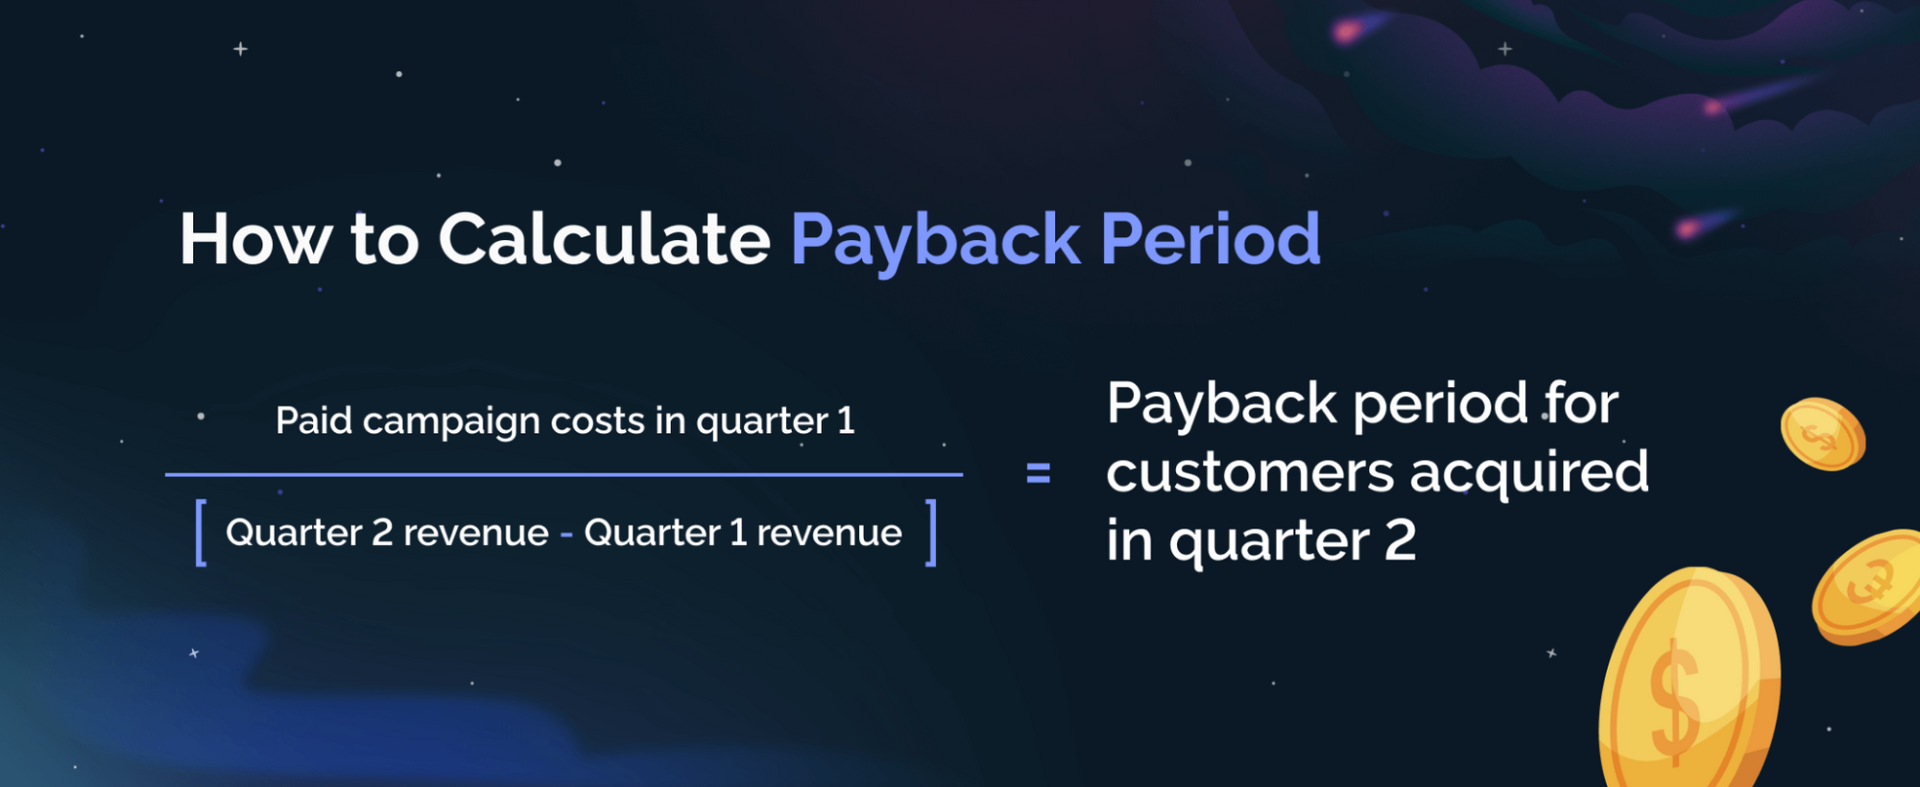 How to Calculate Payback Period